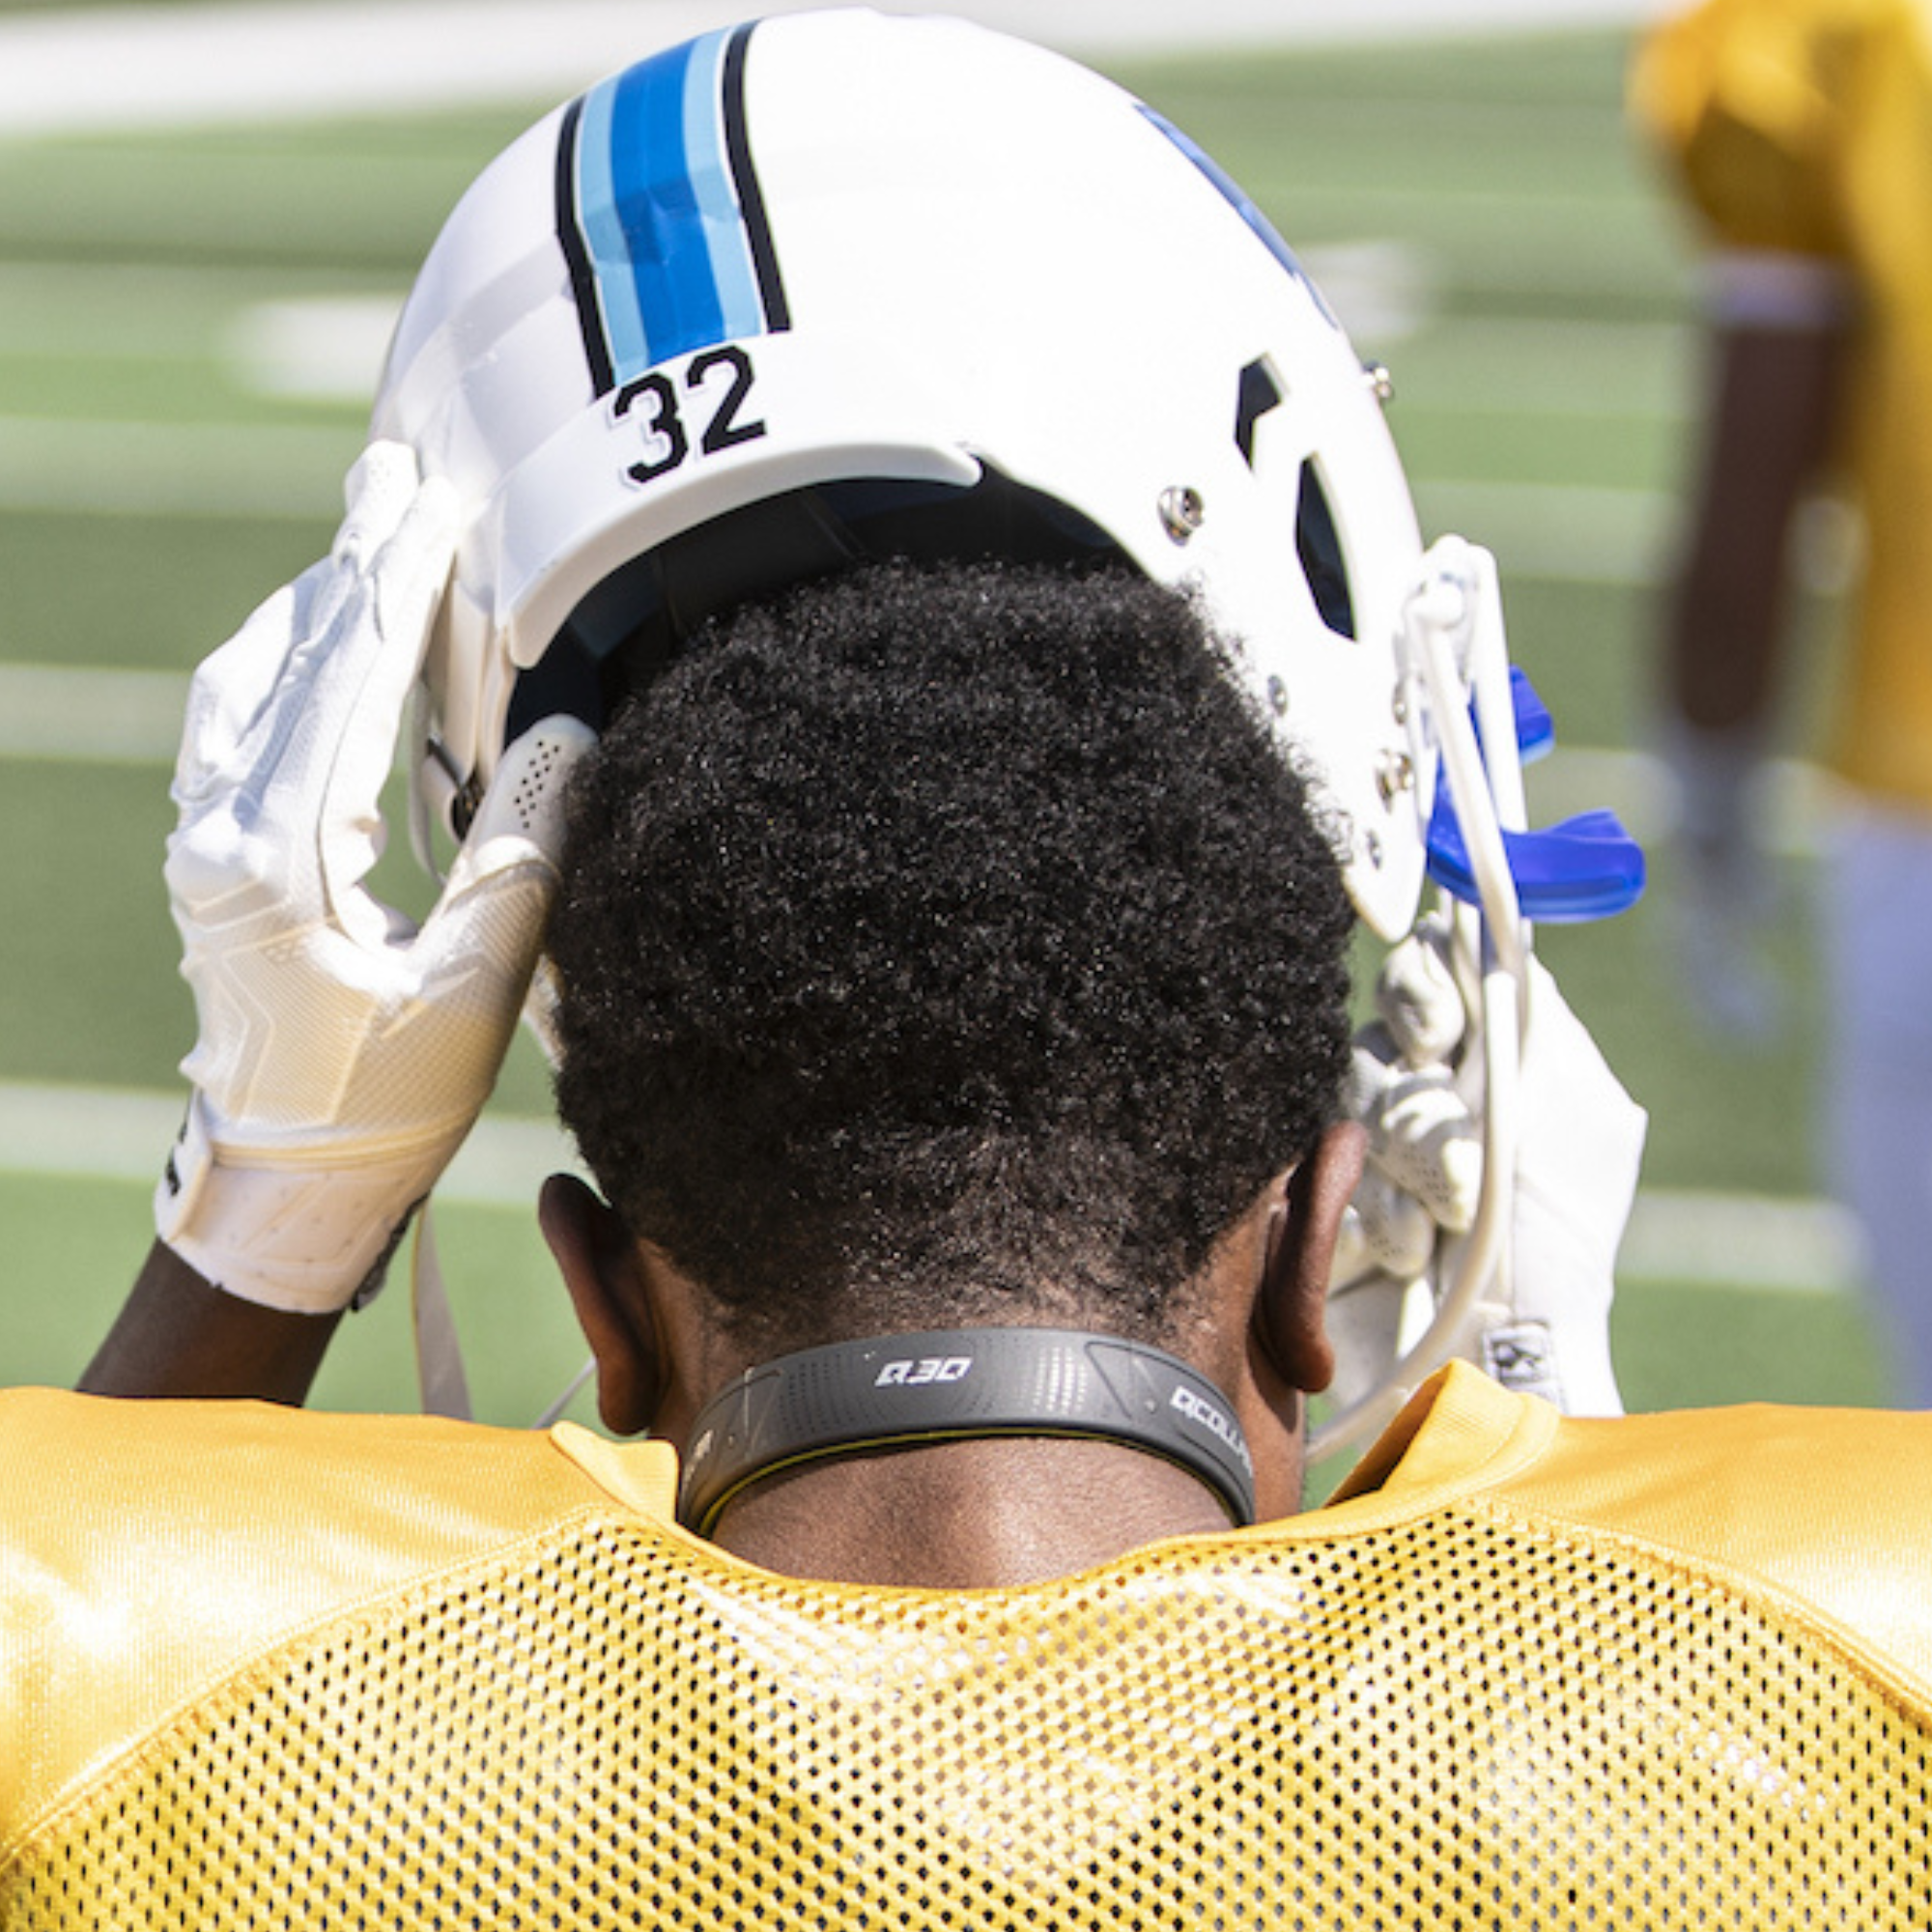 Concussion prevention: Q-collar can reduce brain injury - Sports